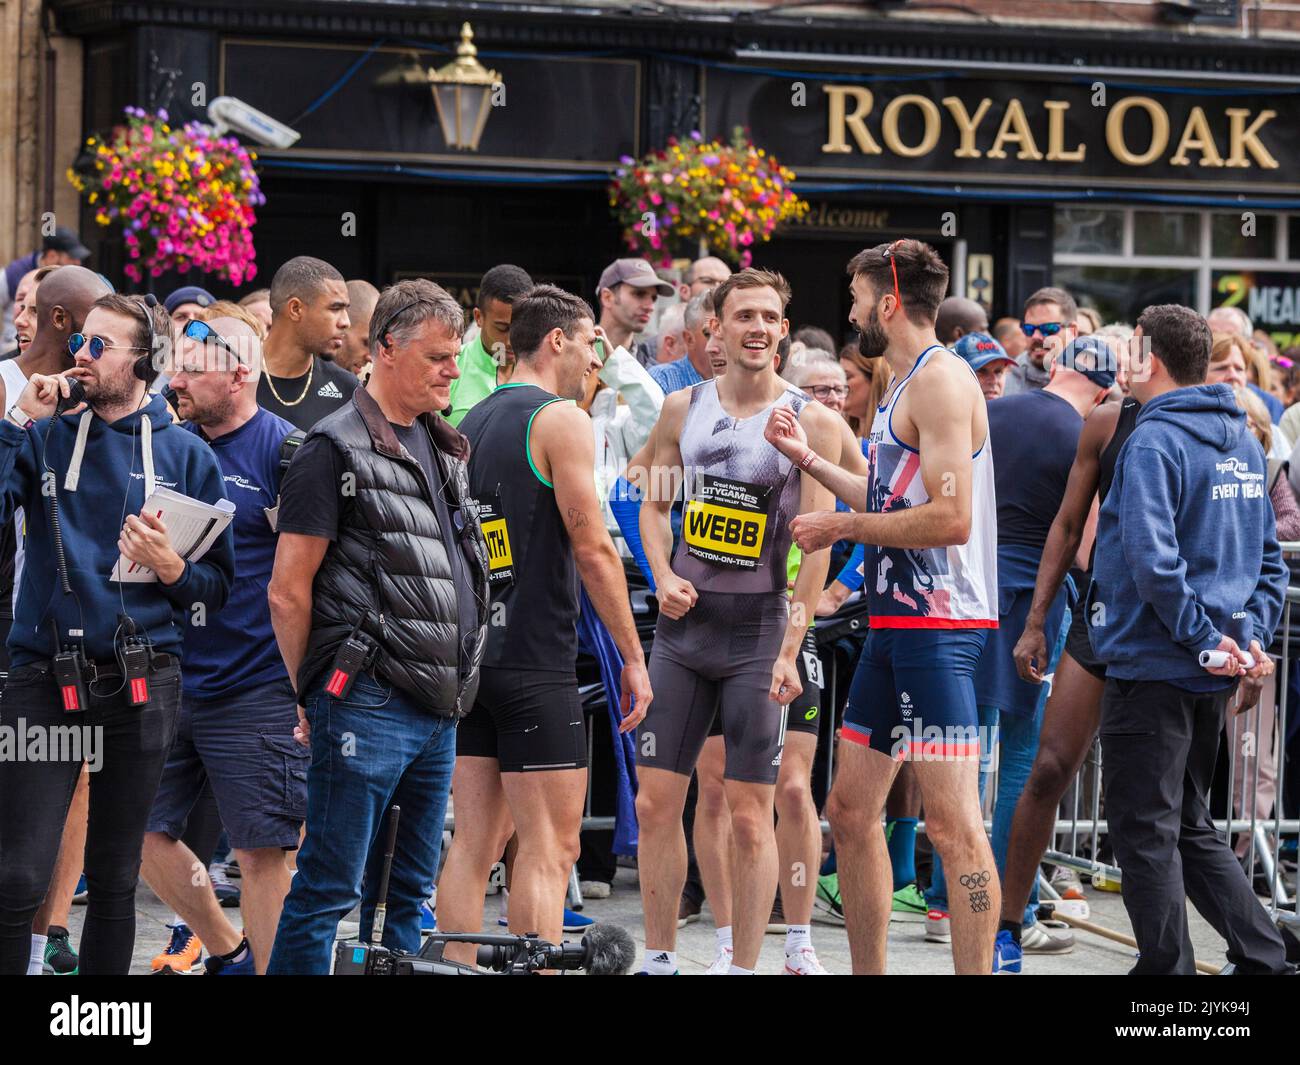 The Great North City Games were held in the High Street ,Stockton and the sprint runners chat and congratulate each other at the end of their race Stock Photo